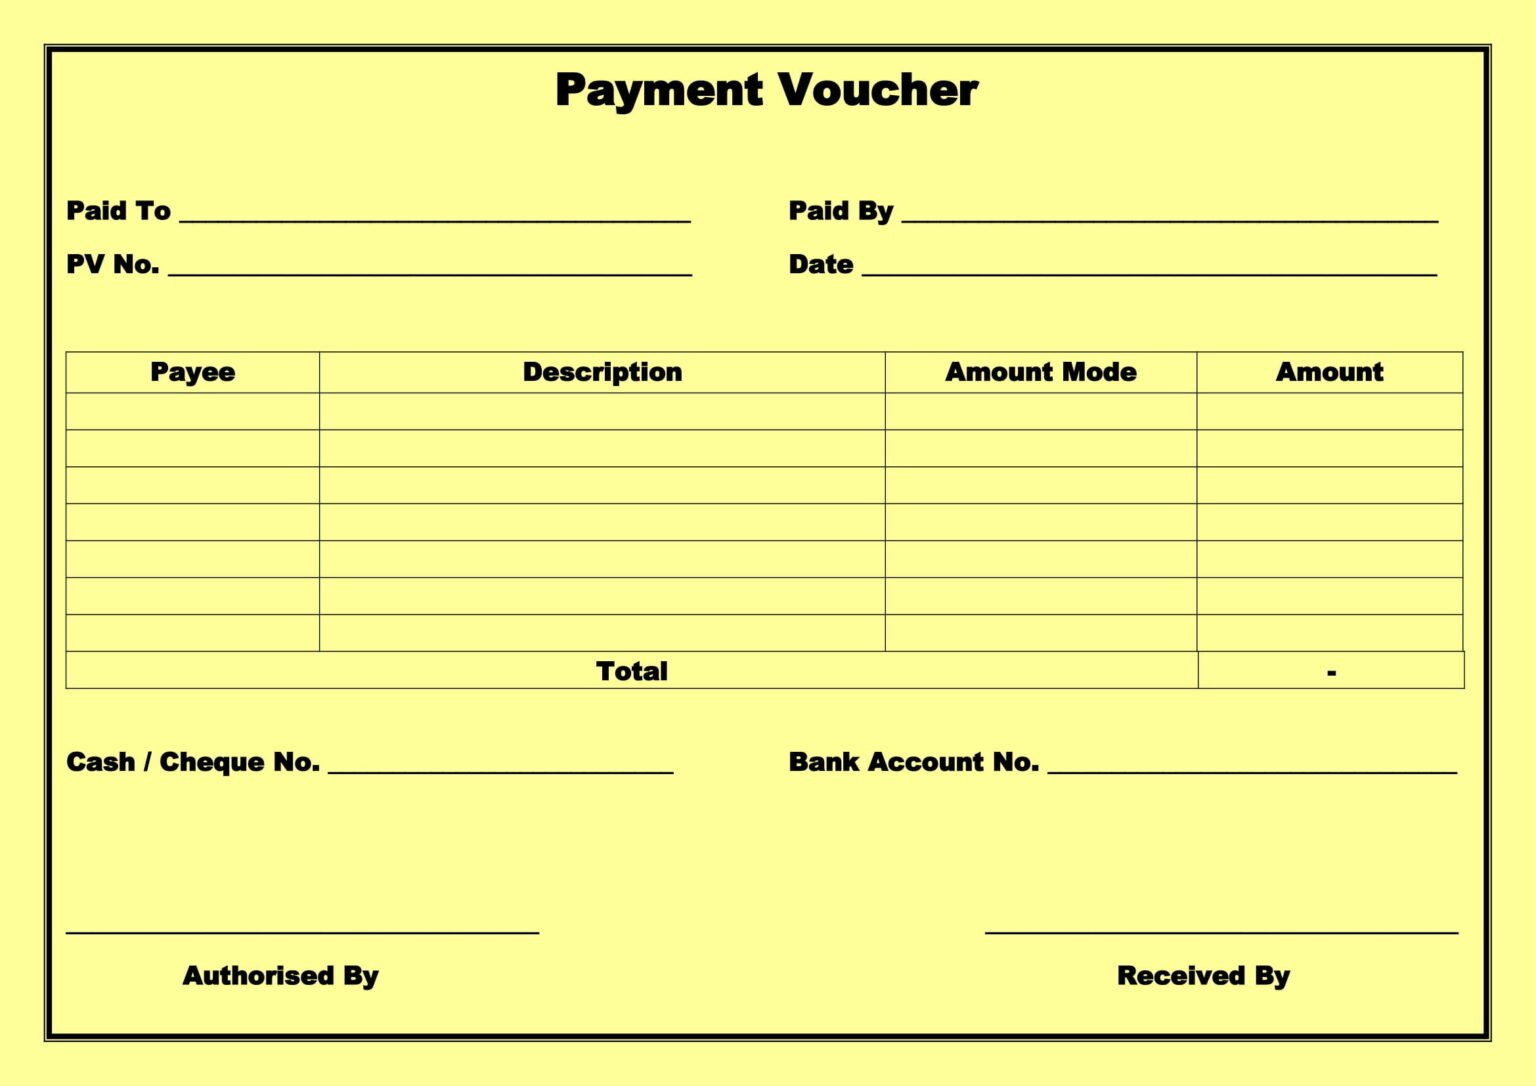 download-payment-voucher-blue-format-in-word-docx